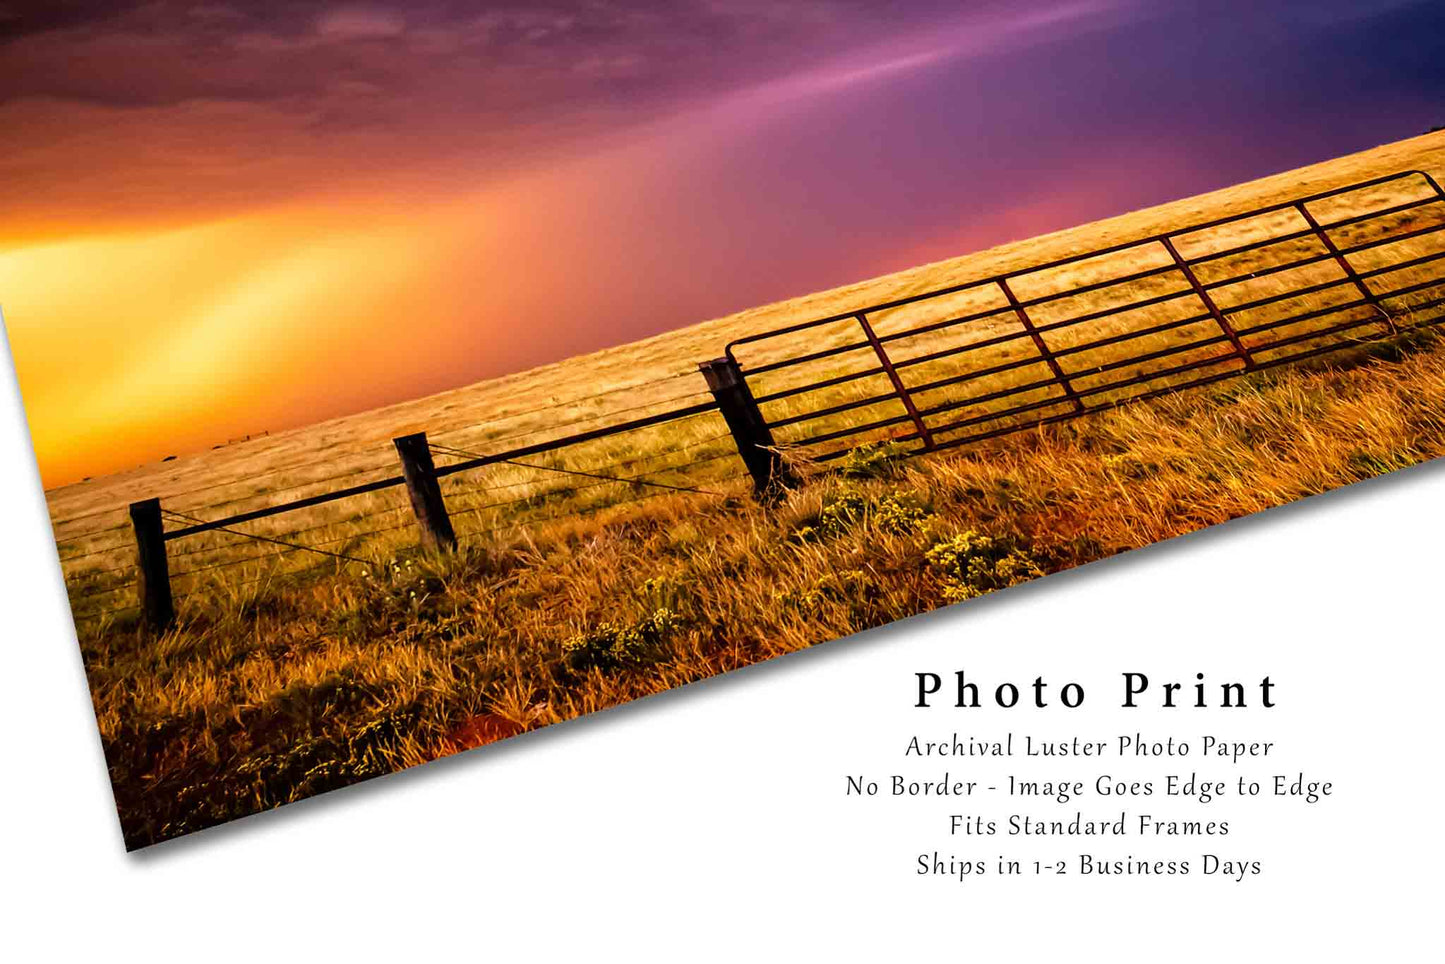 Country Photo Print | Stormy Sky over Fence Gate Picture | Oklahoma Wall Art | Storm Photography | Farmhouse Decor